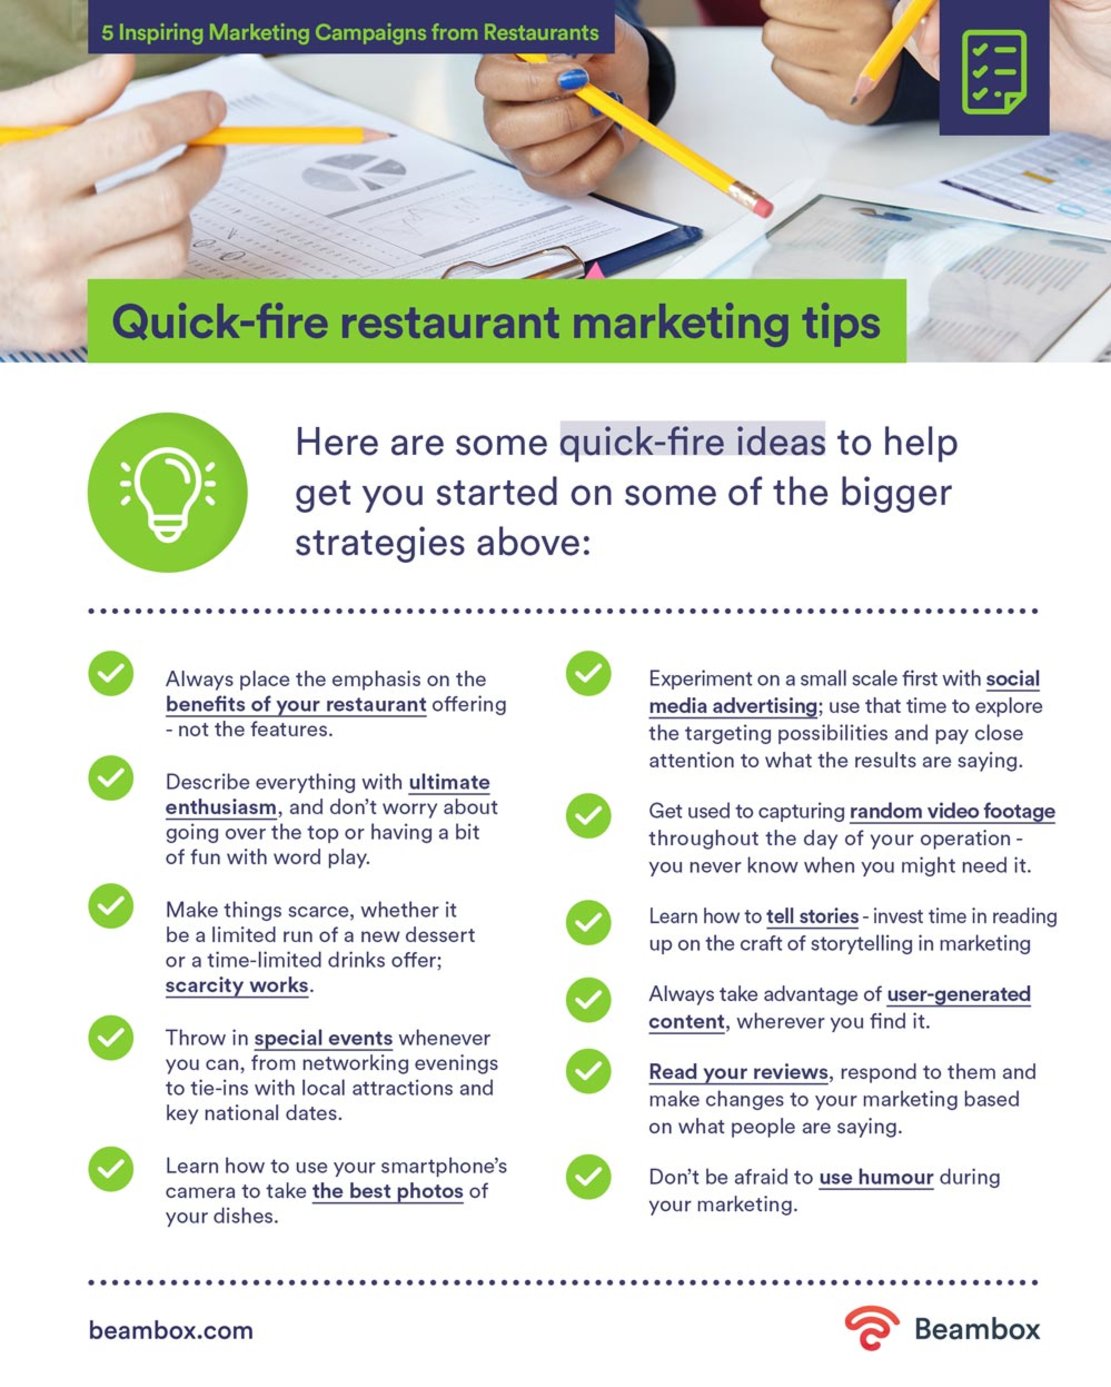 5-Inspiring-Marketing-Campaigns-From-Restaurants-Infographic